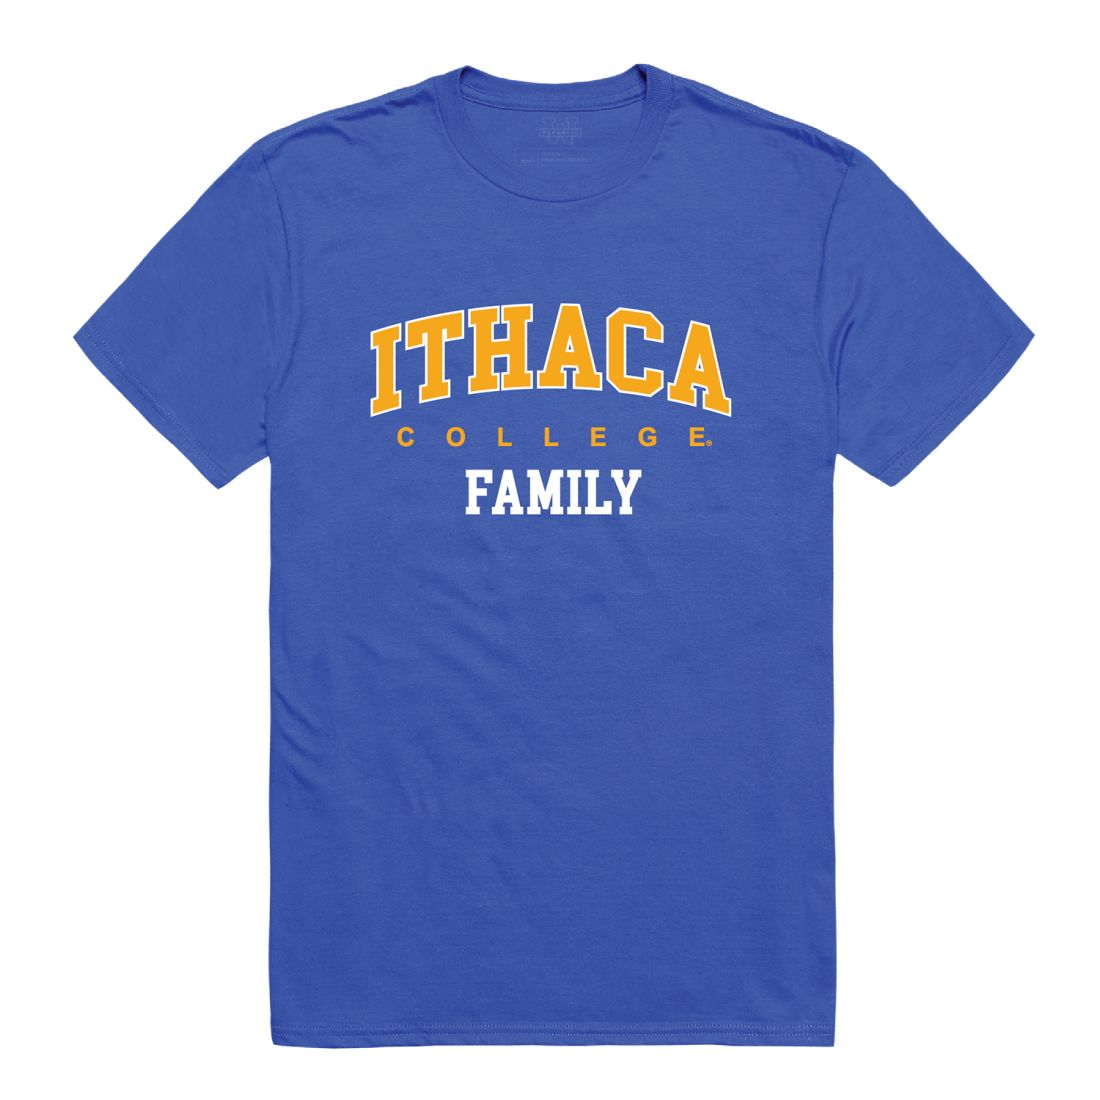 Ithaca College Bombers Family T-Shirt